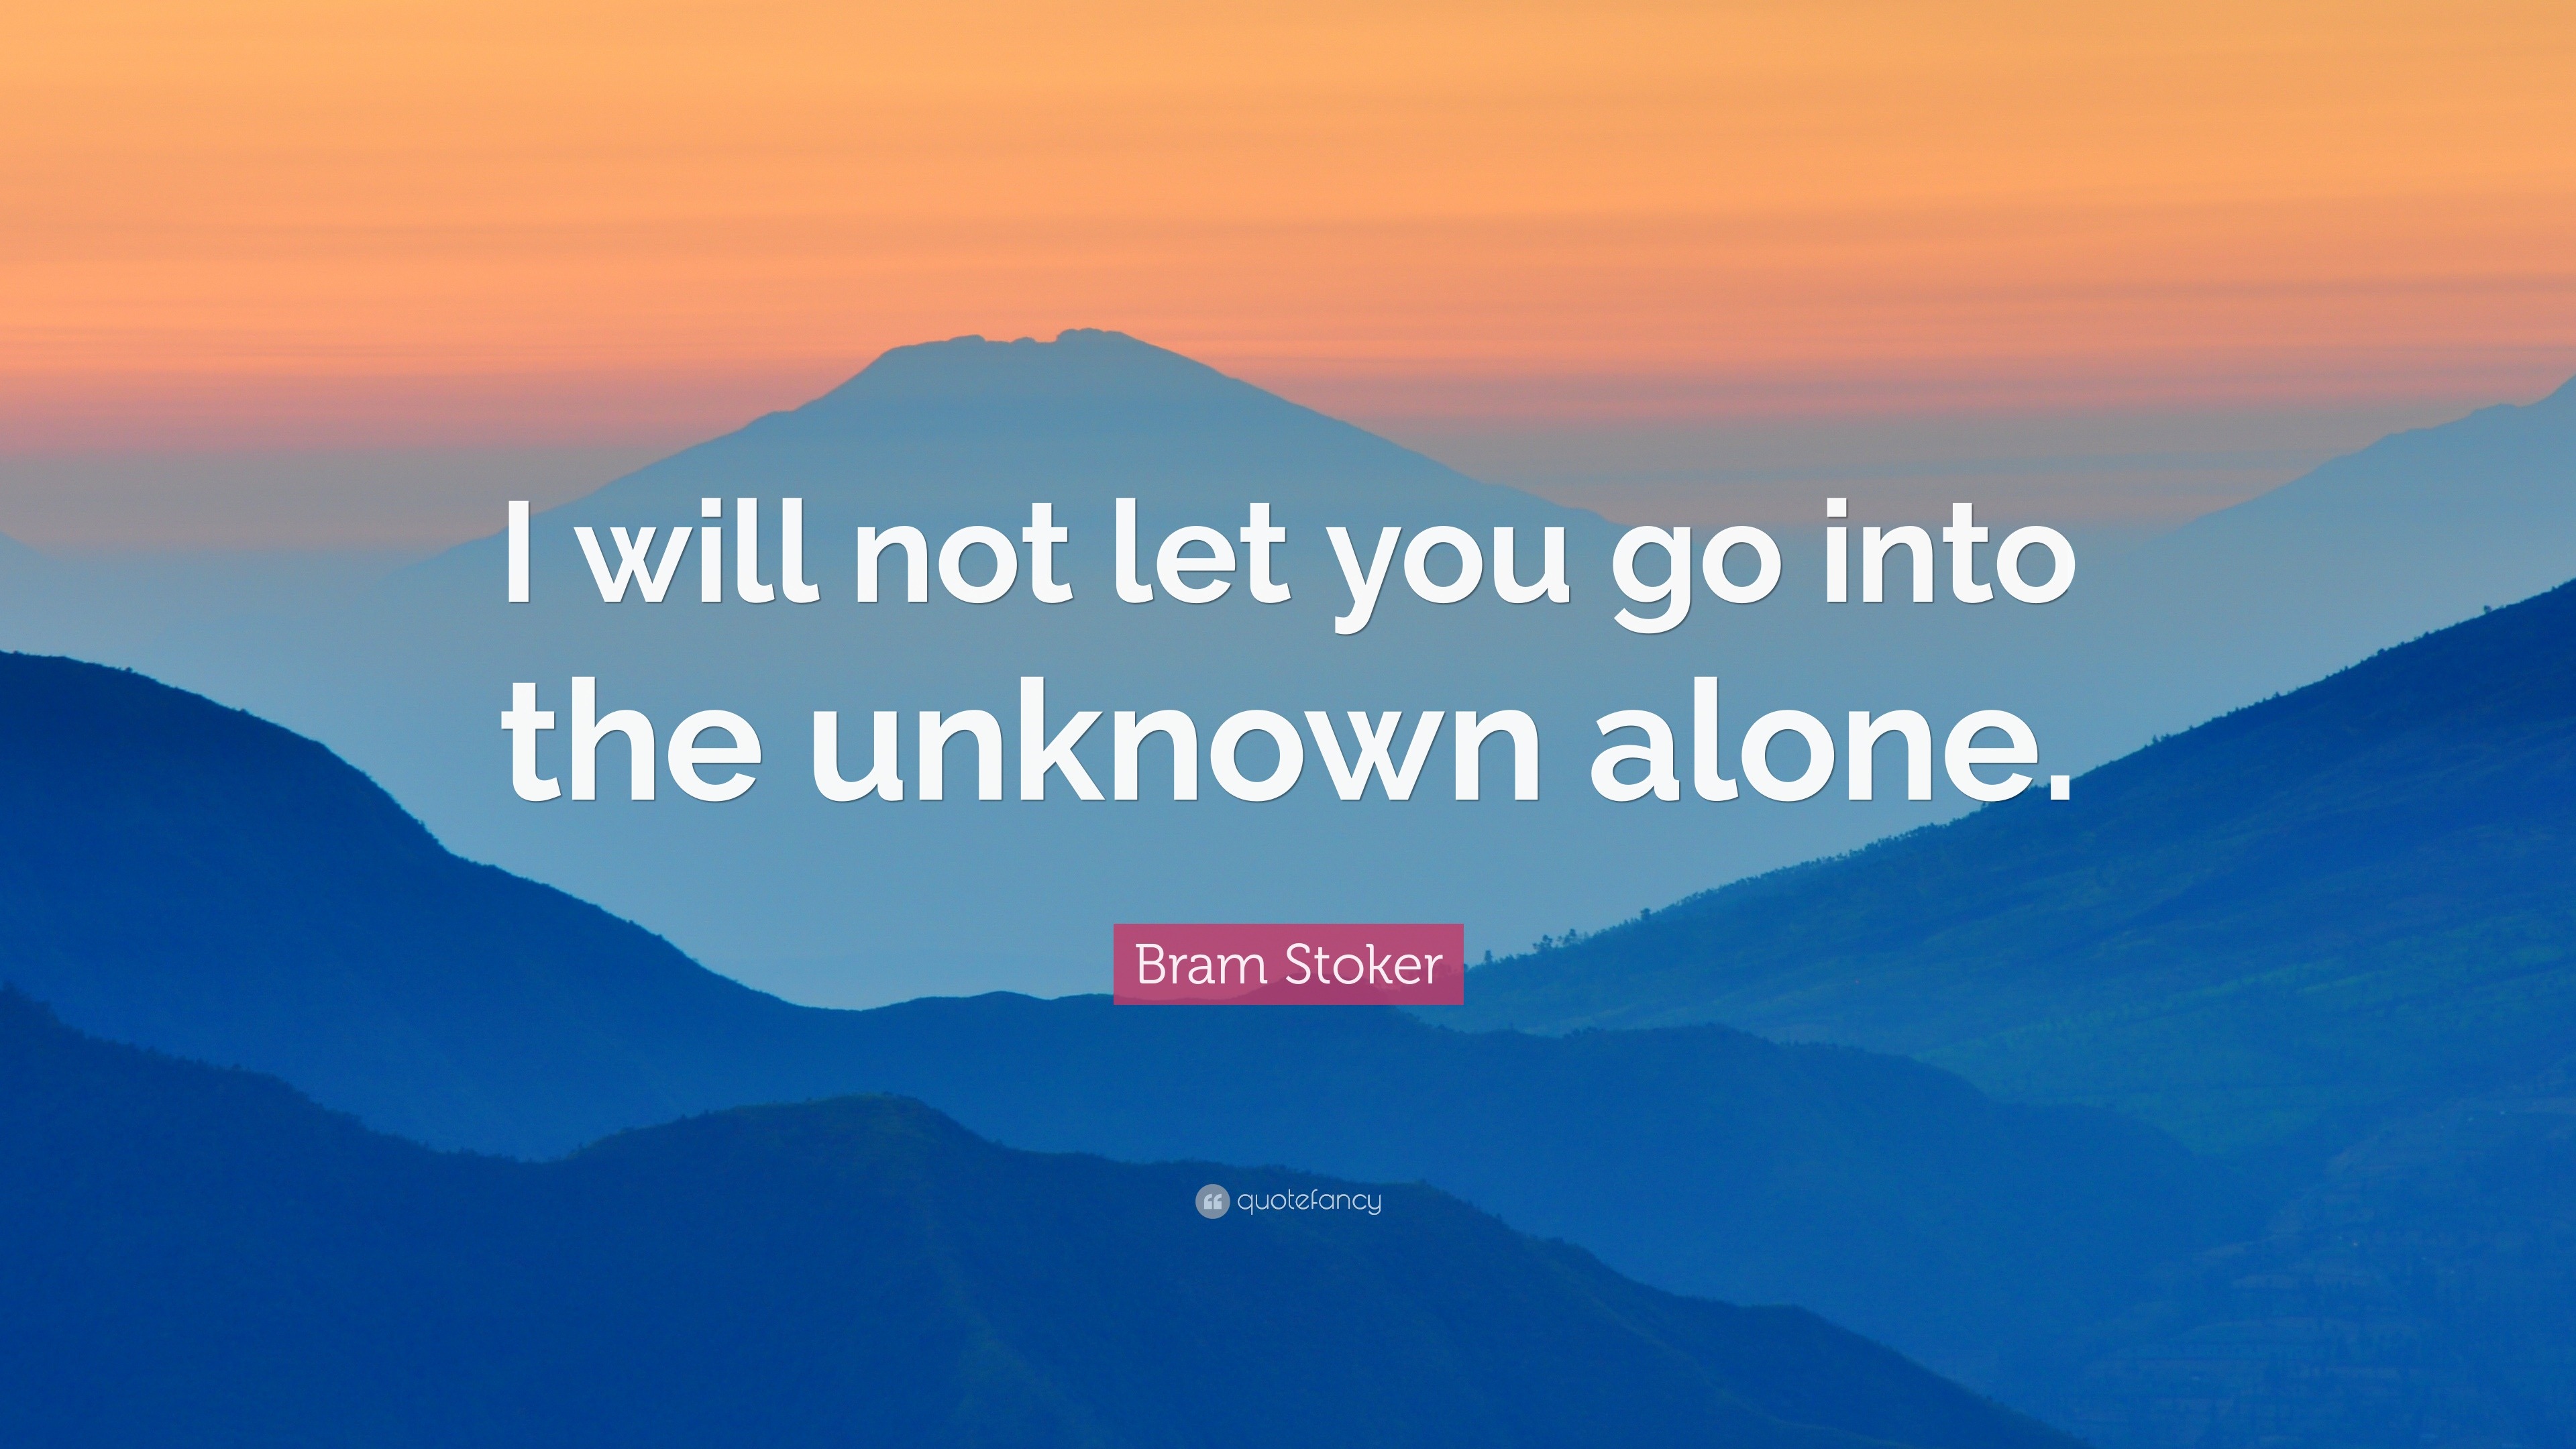 Bram Stoker Quote: “I will not let you go into the unknown alone.”